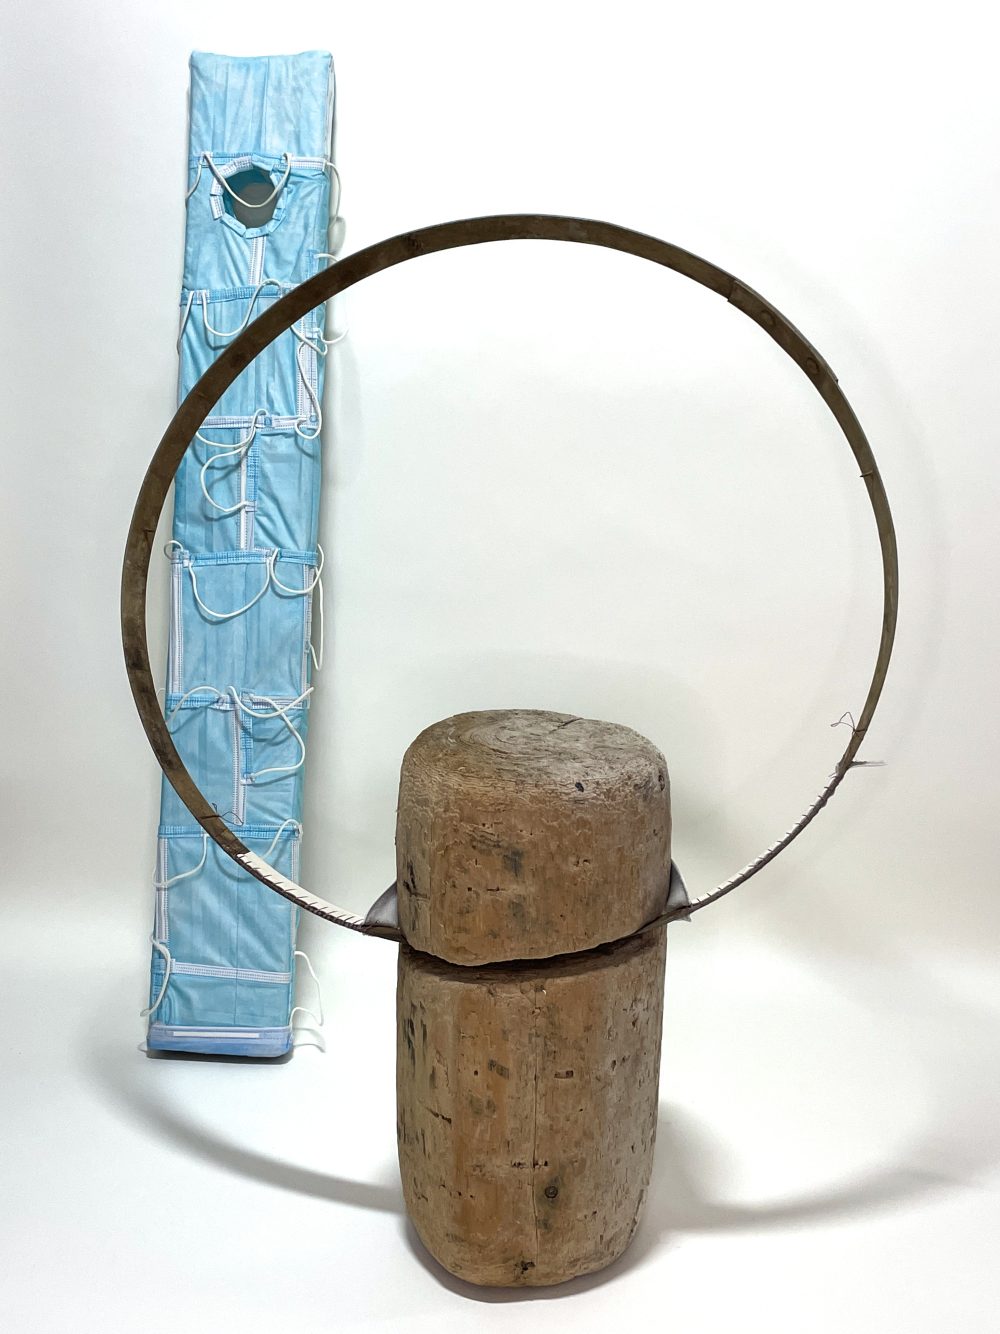 Two sculptures; one of a standing piece of wood with a metal ring and the other behind it, a tall structure covered in blue masks.